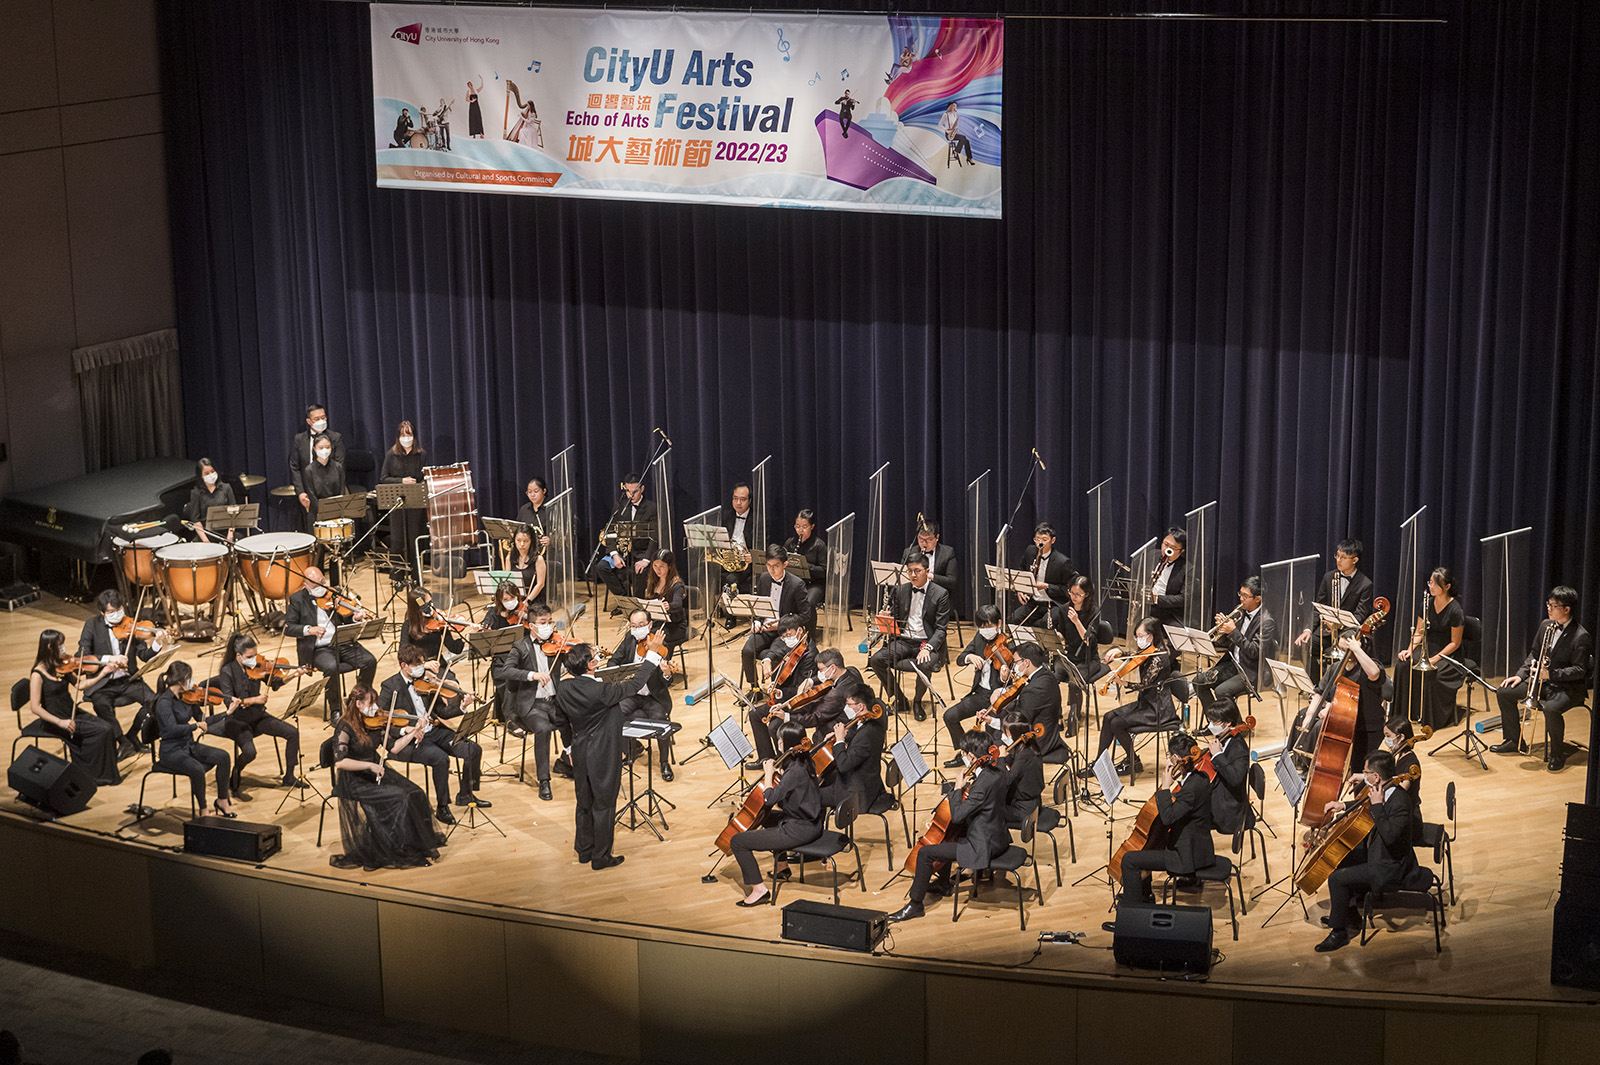 The CityU Philharmonic Orchestra entertained the audience with an evening of melodious music.